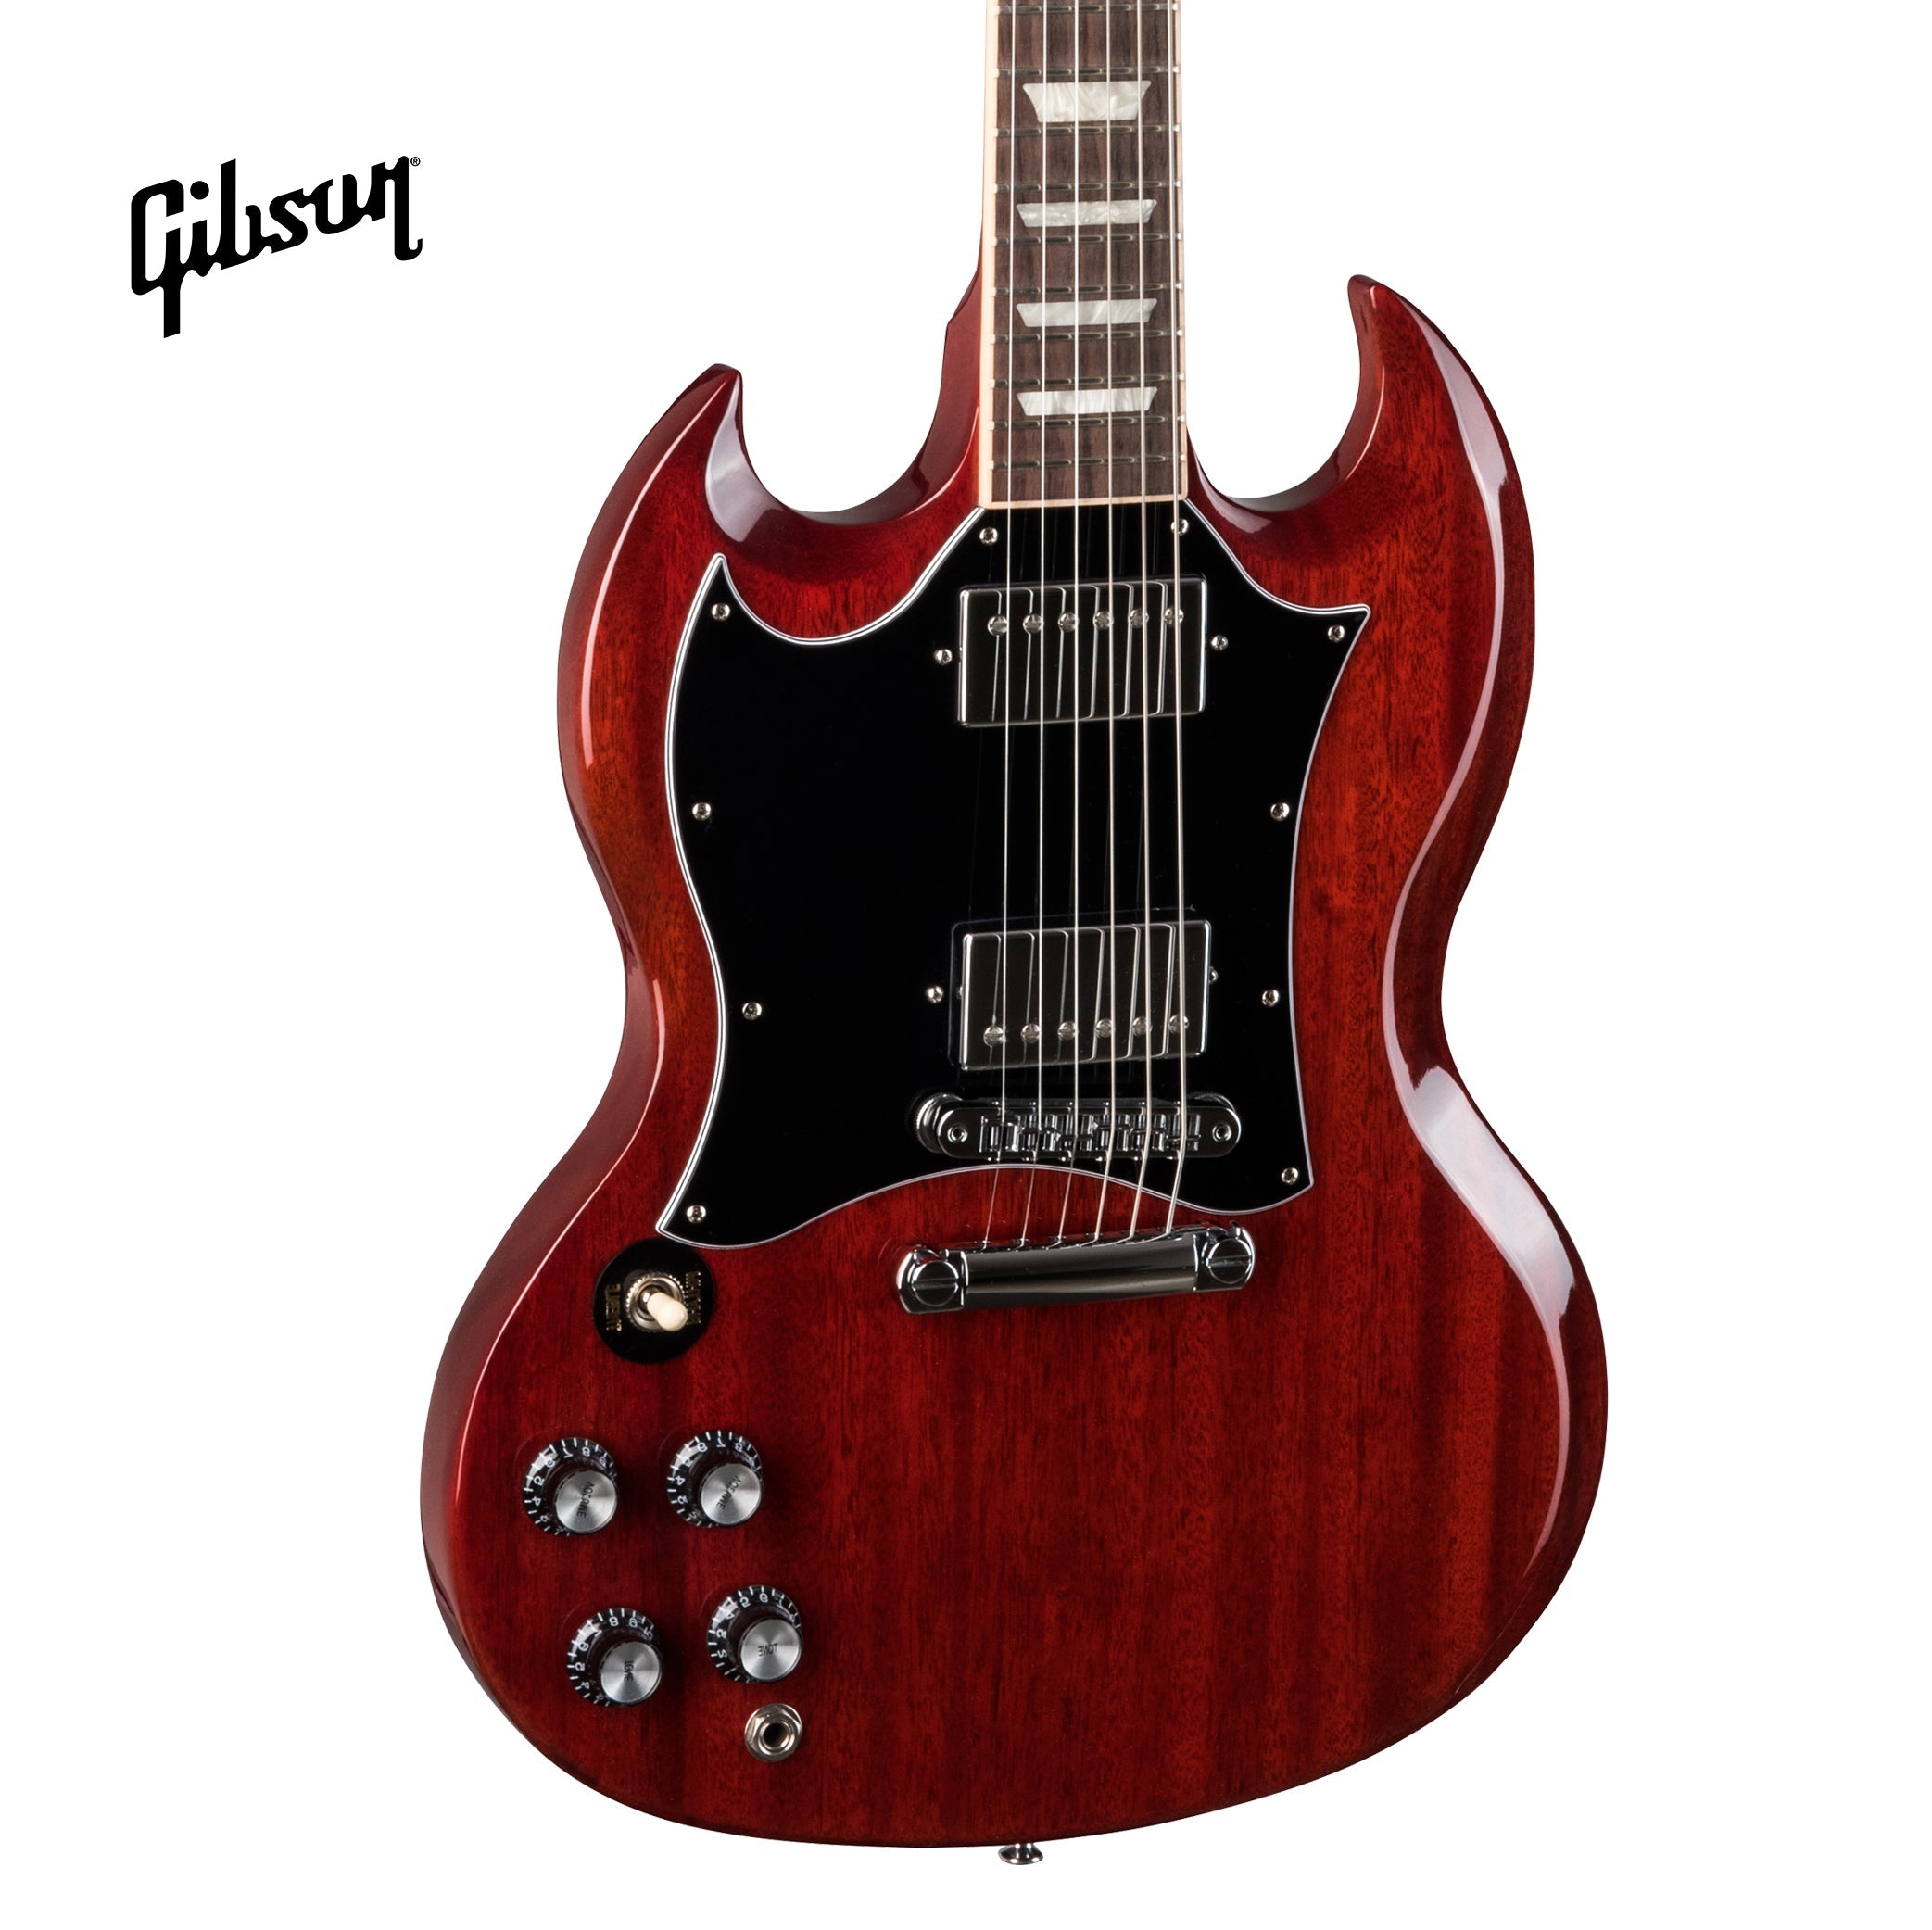 GIBSON SG STANDARD LEFT-HANDED ELECTRIC GUITAR - HERITAGE CHERRY